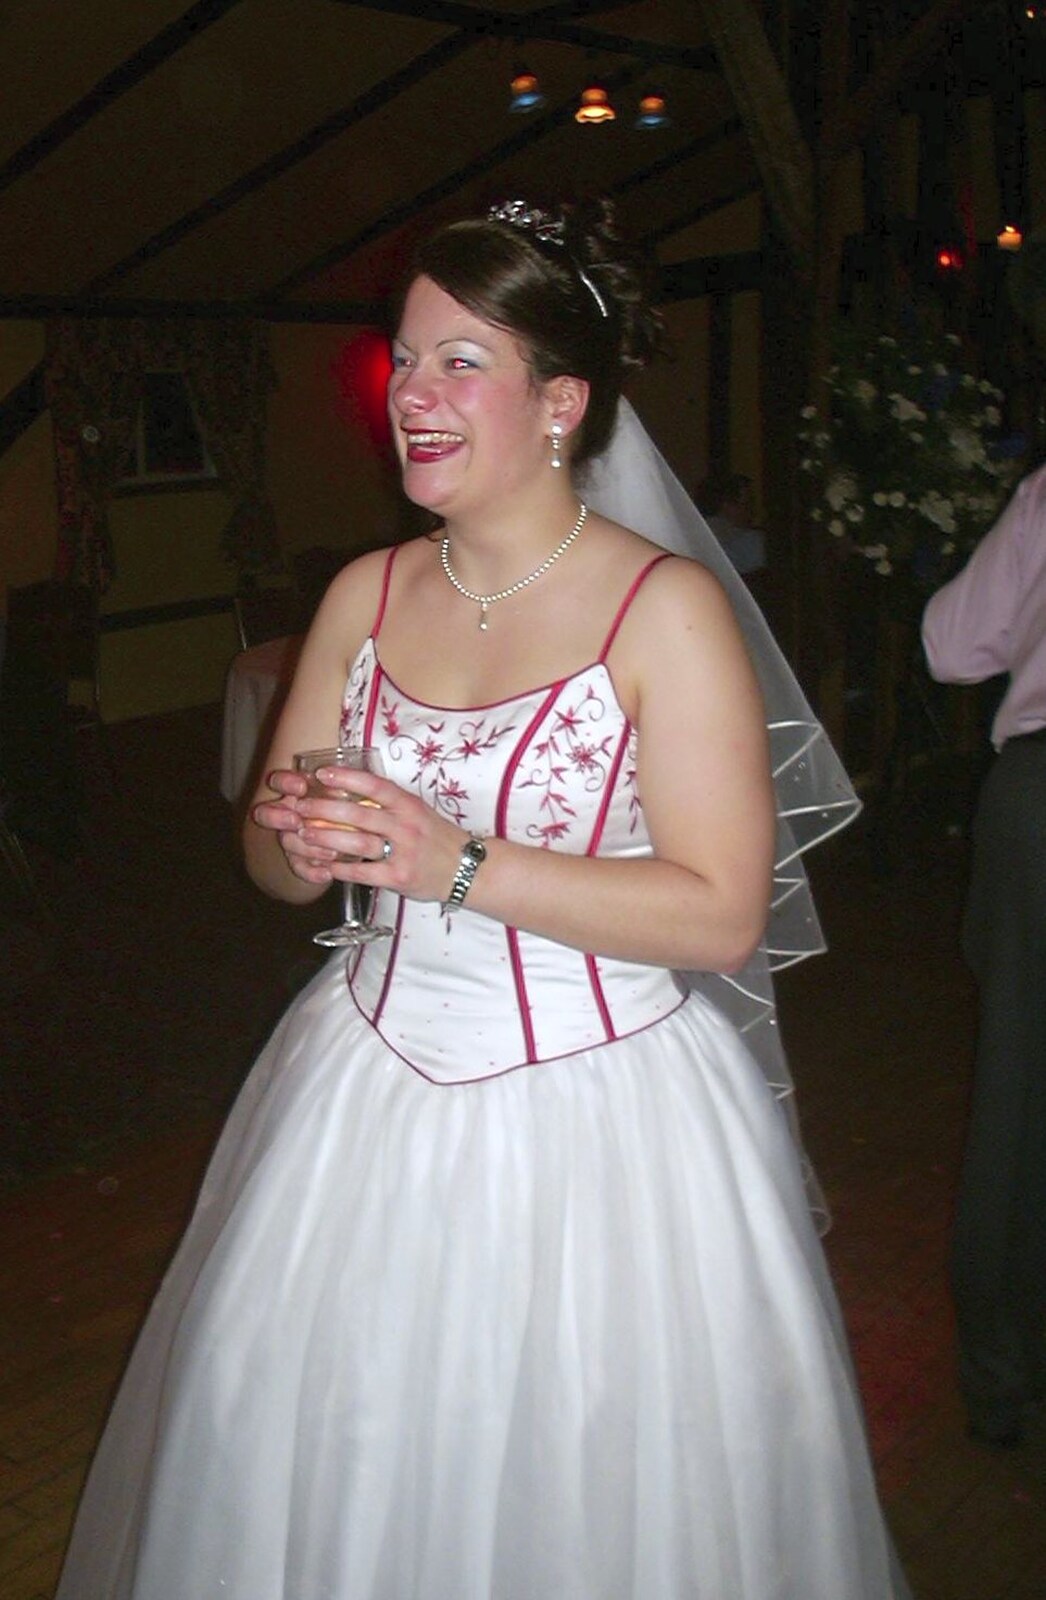 Clare in her dress from Mikey-P and Clare's Wedding Reception, Brome Grange, Suffolk - 20th March 2004